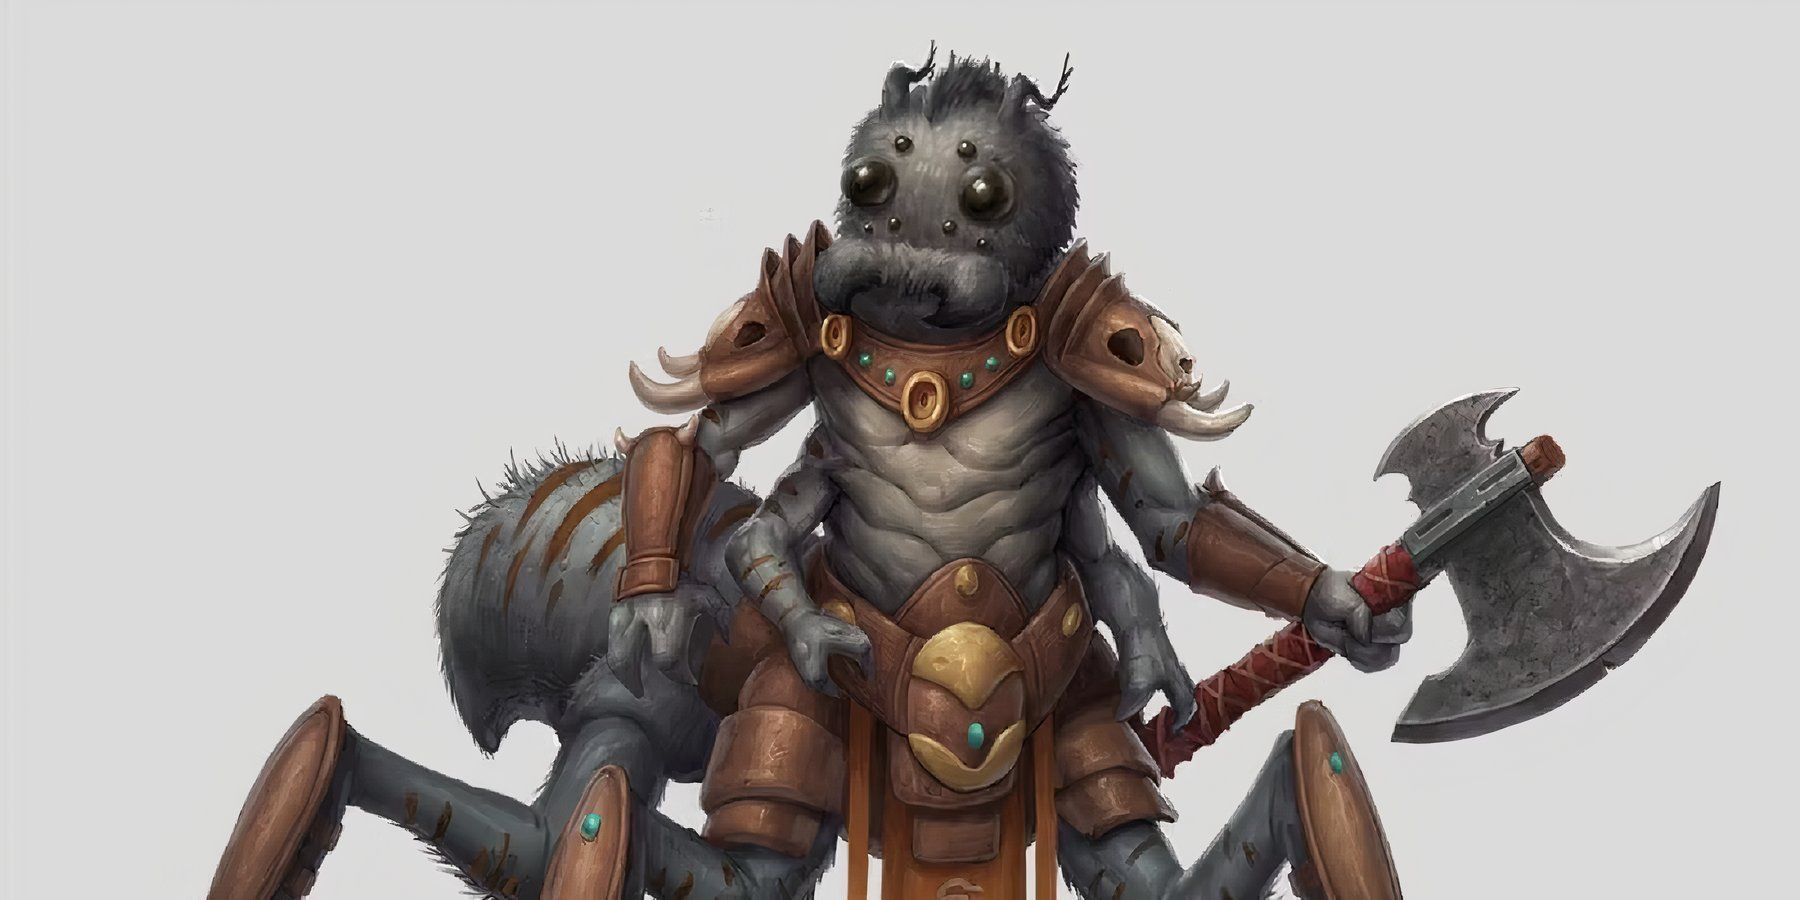 Dungeons and Dragons a strangely adorable spider creature armored and armed for battle